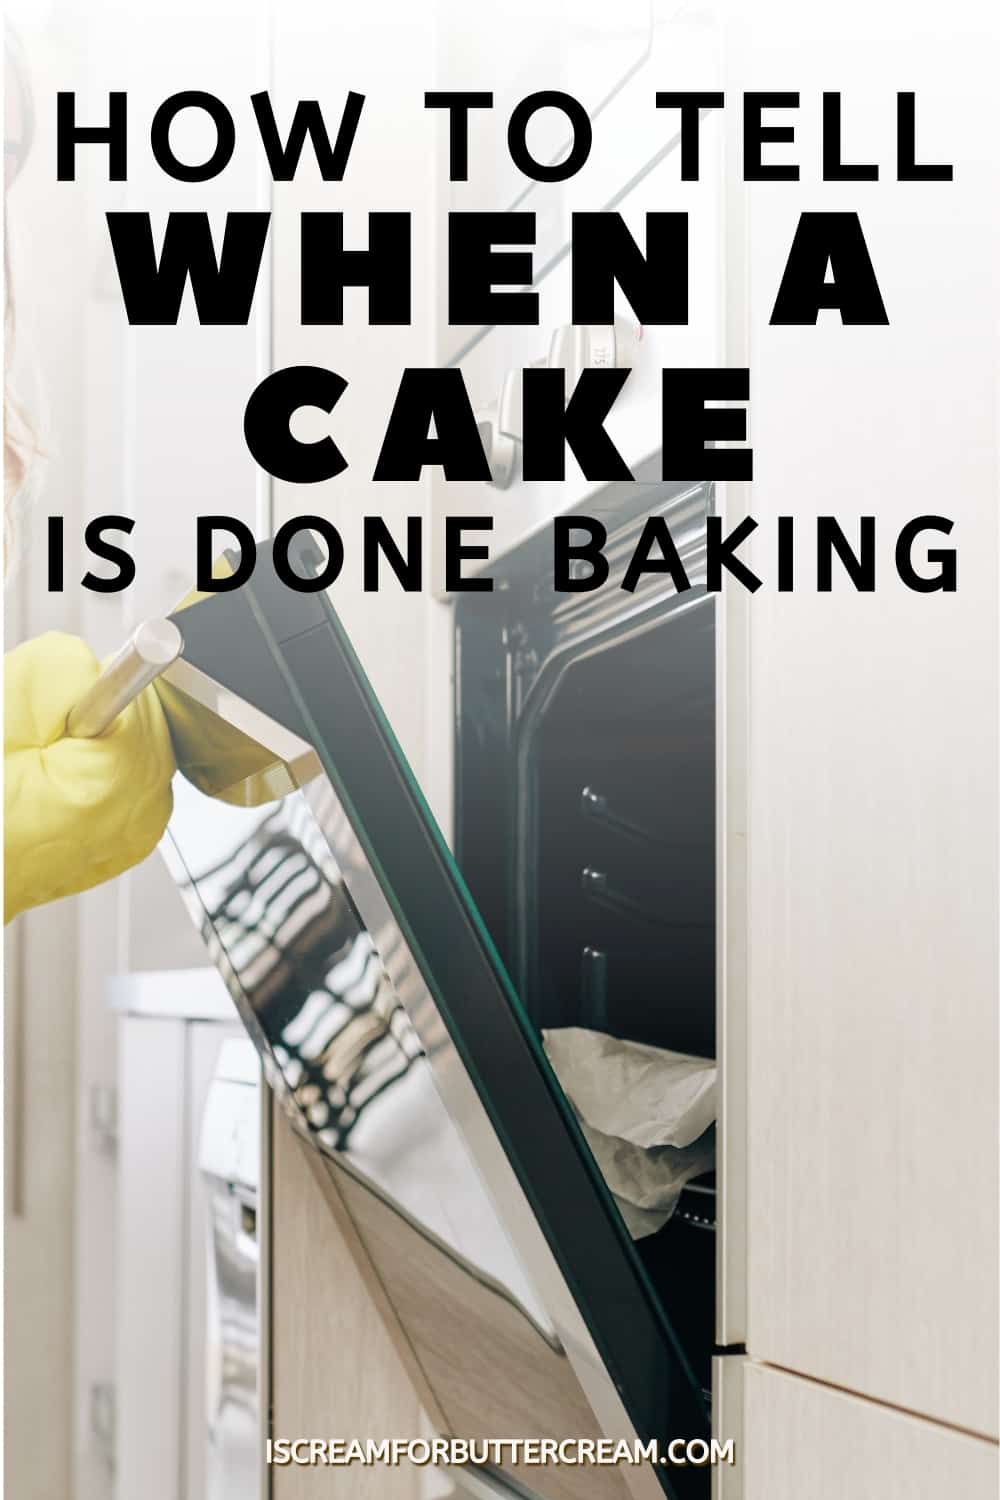 How to Tell When a Cake is Done